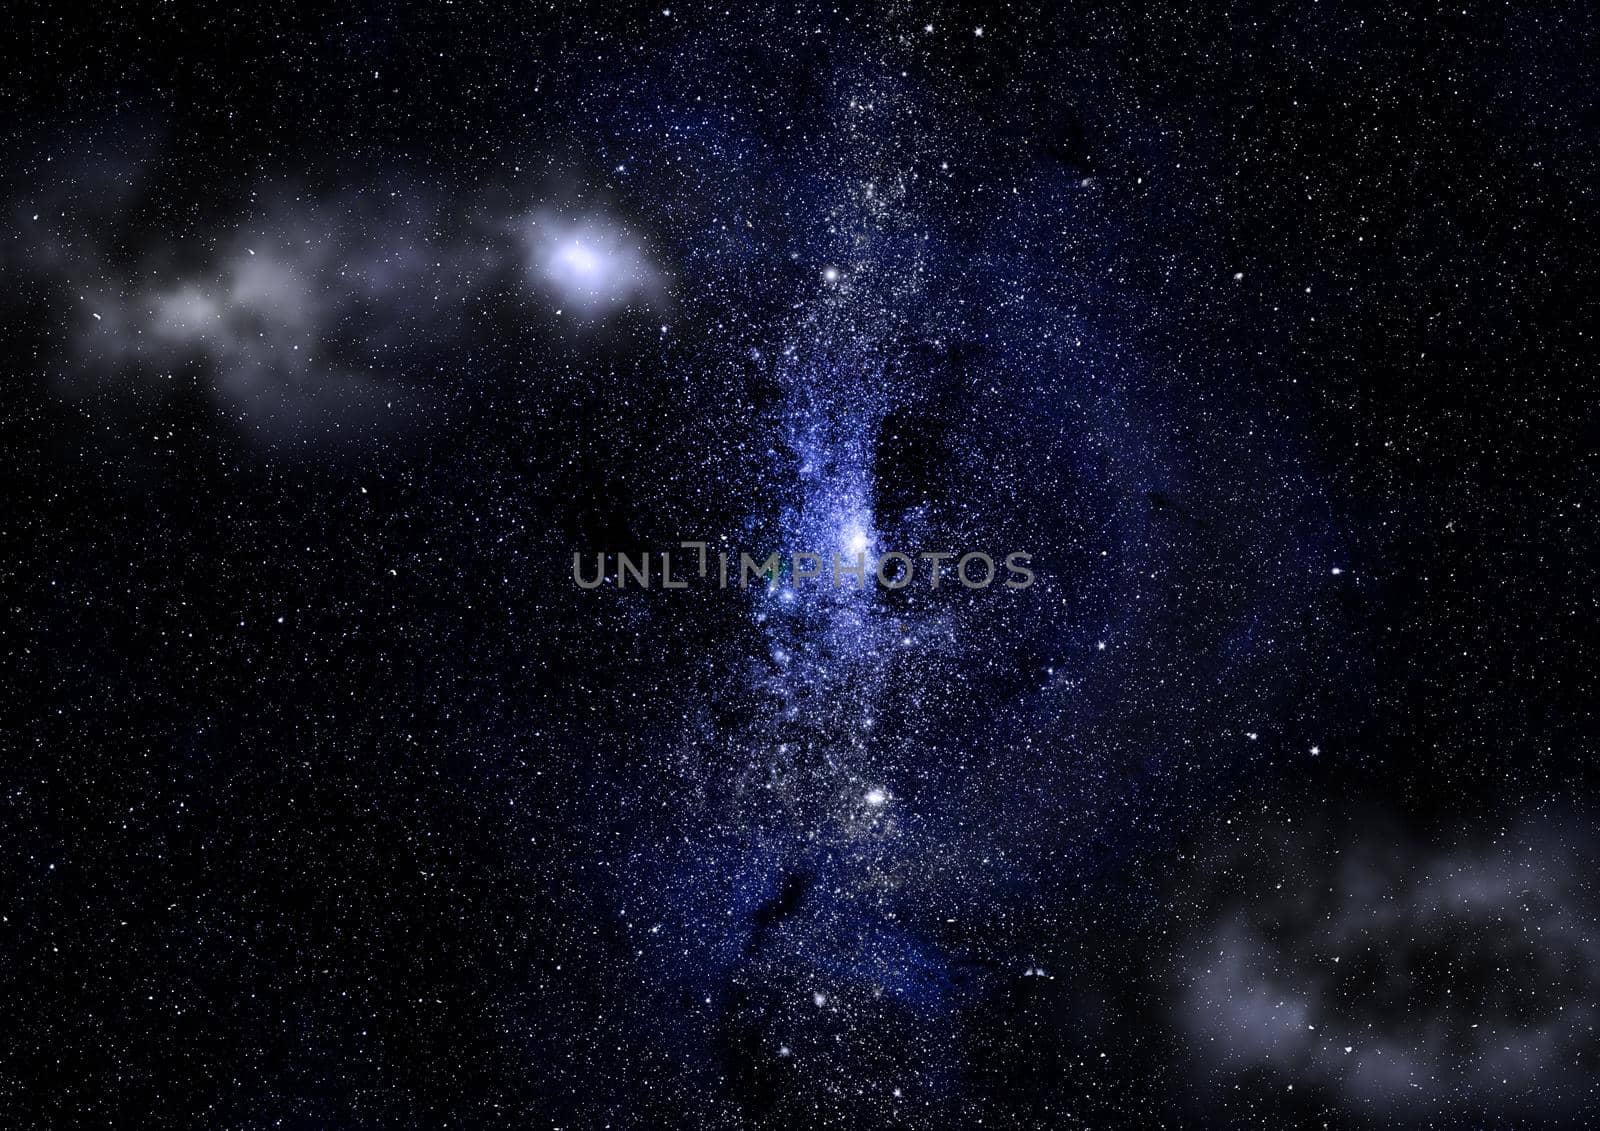 Star field in space a nebulae and a gas congestion. Elements of this image furnished by NASA.